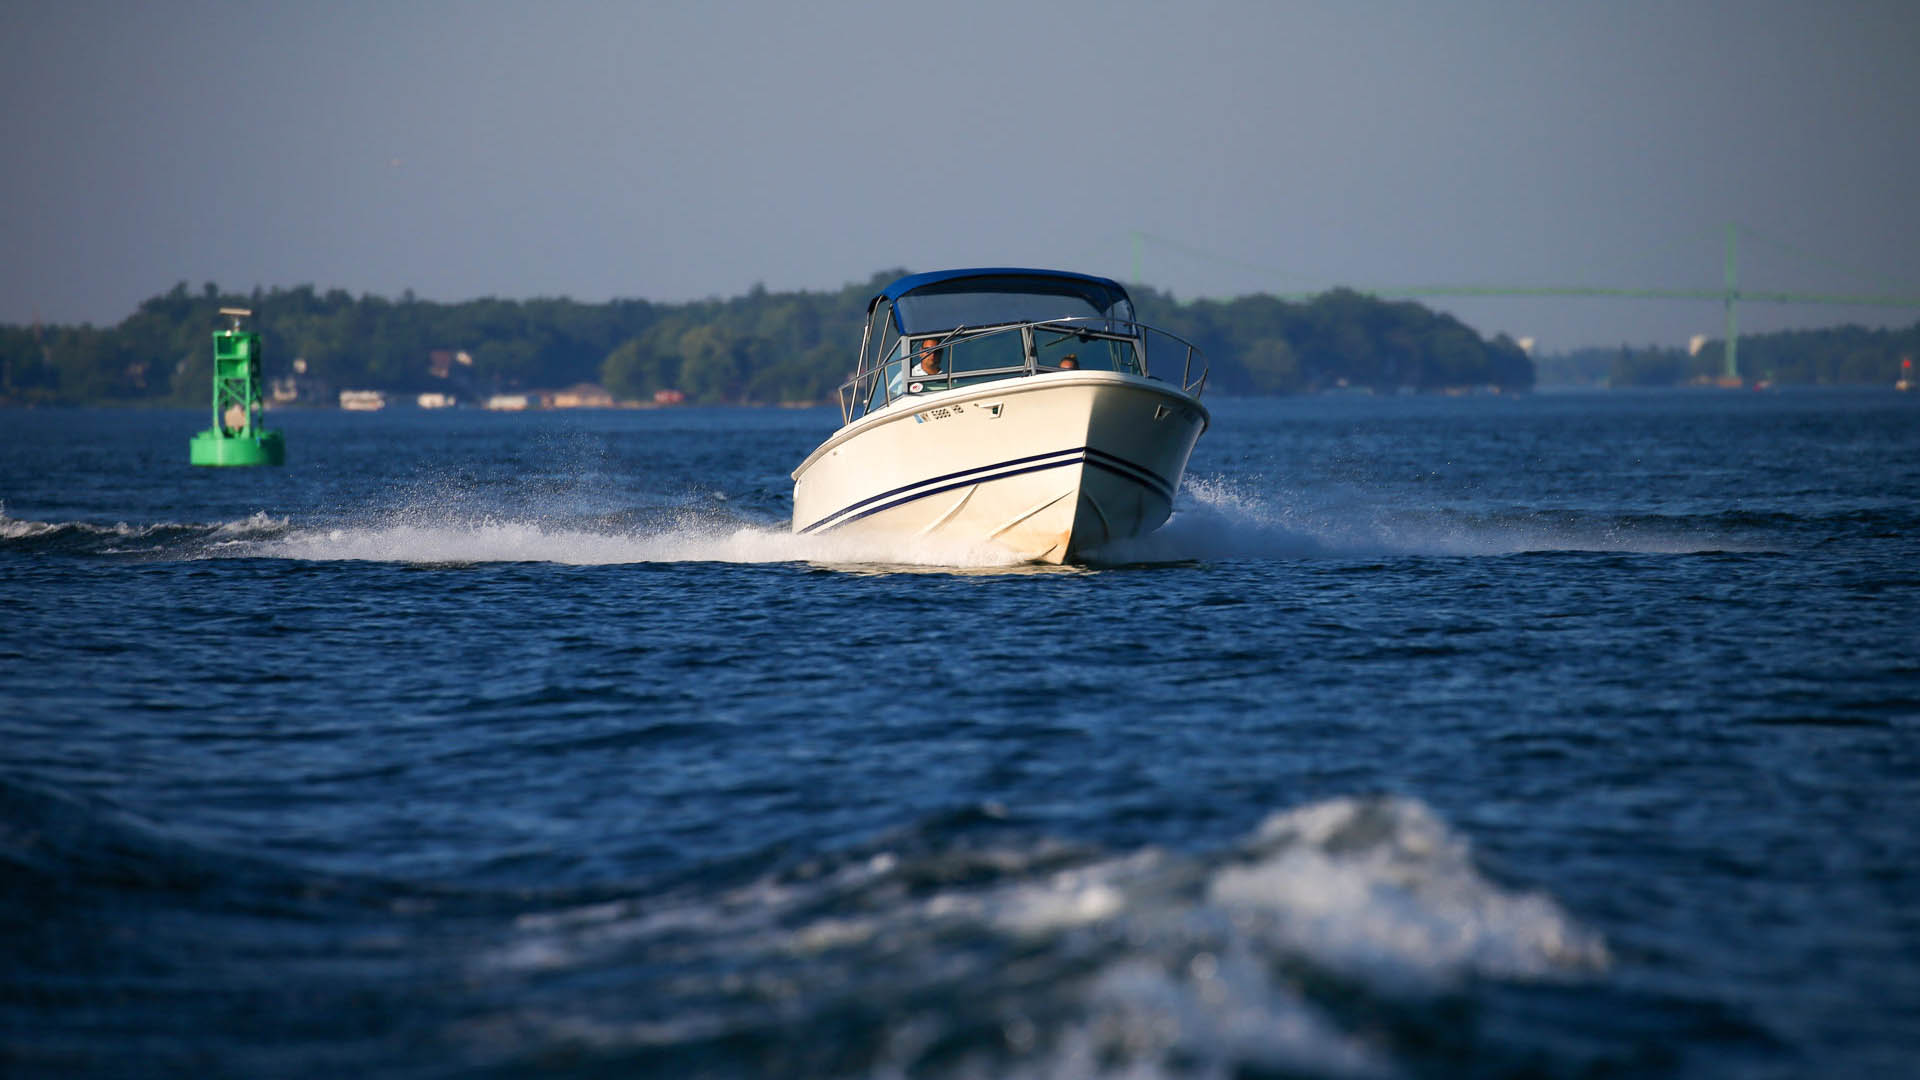 Boating in Thousand Islands